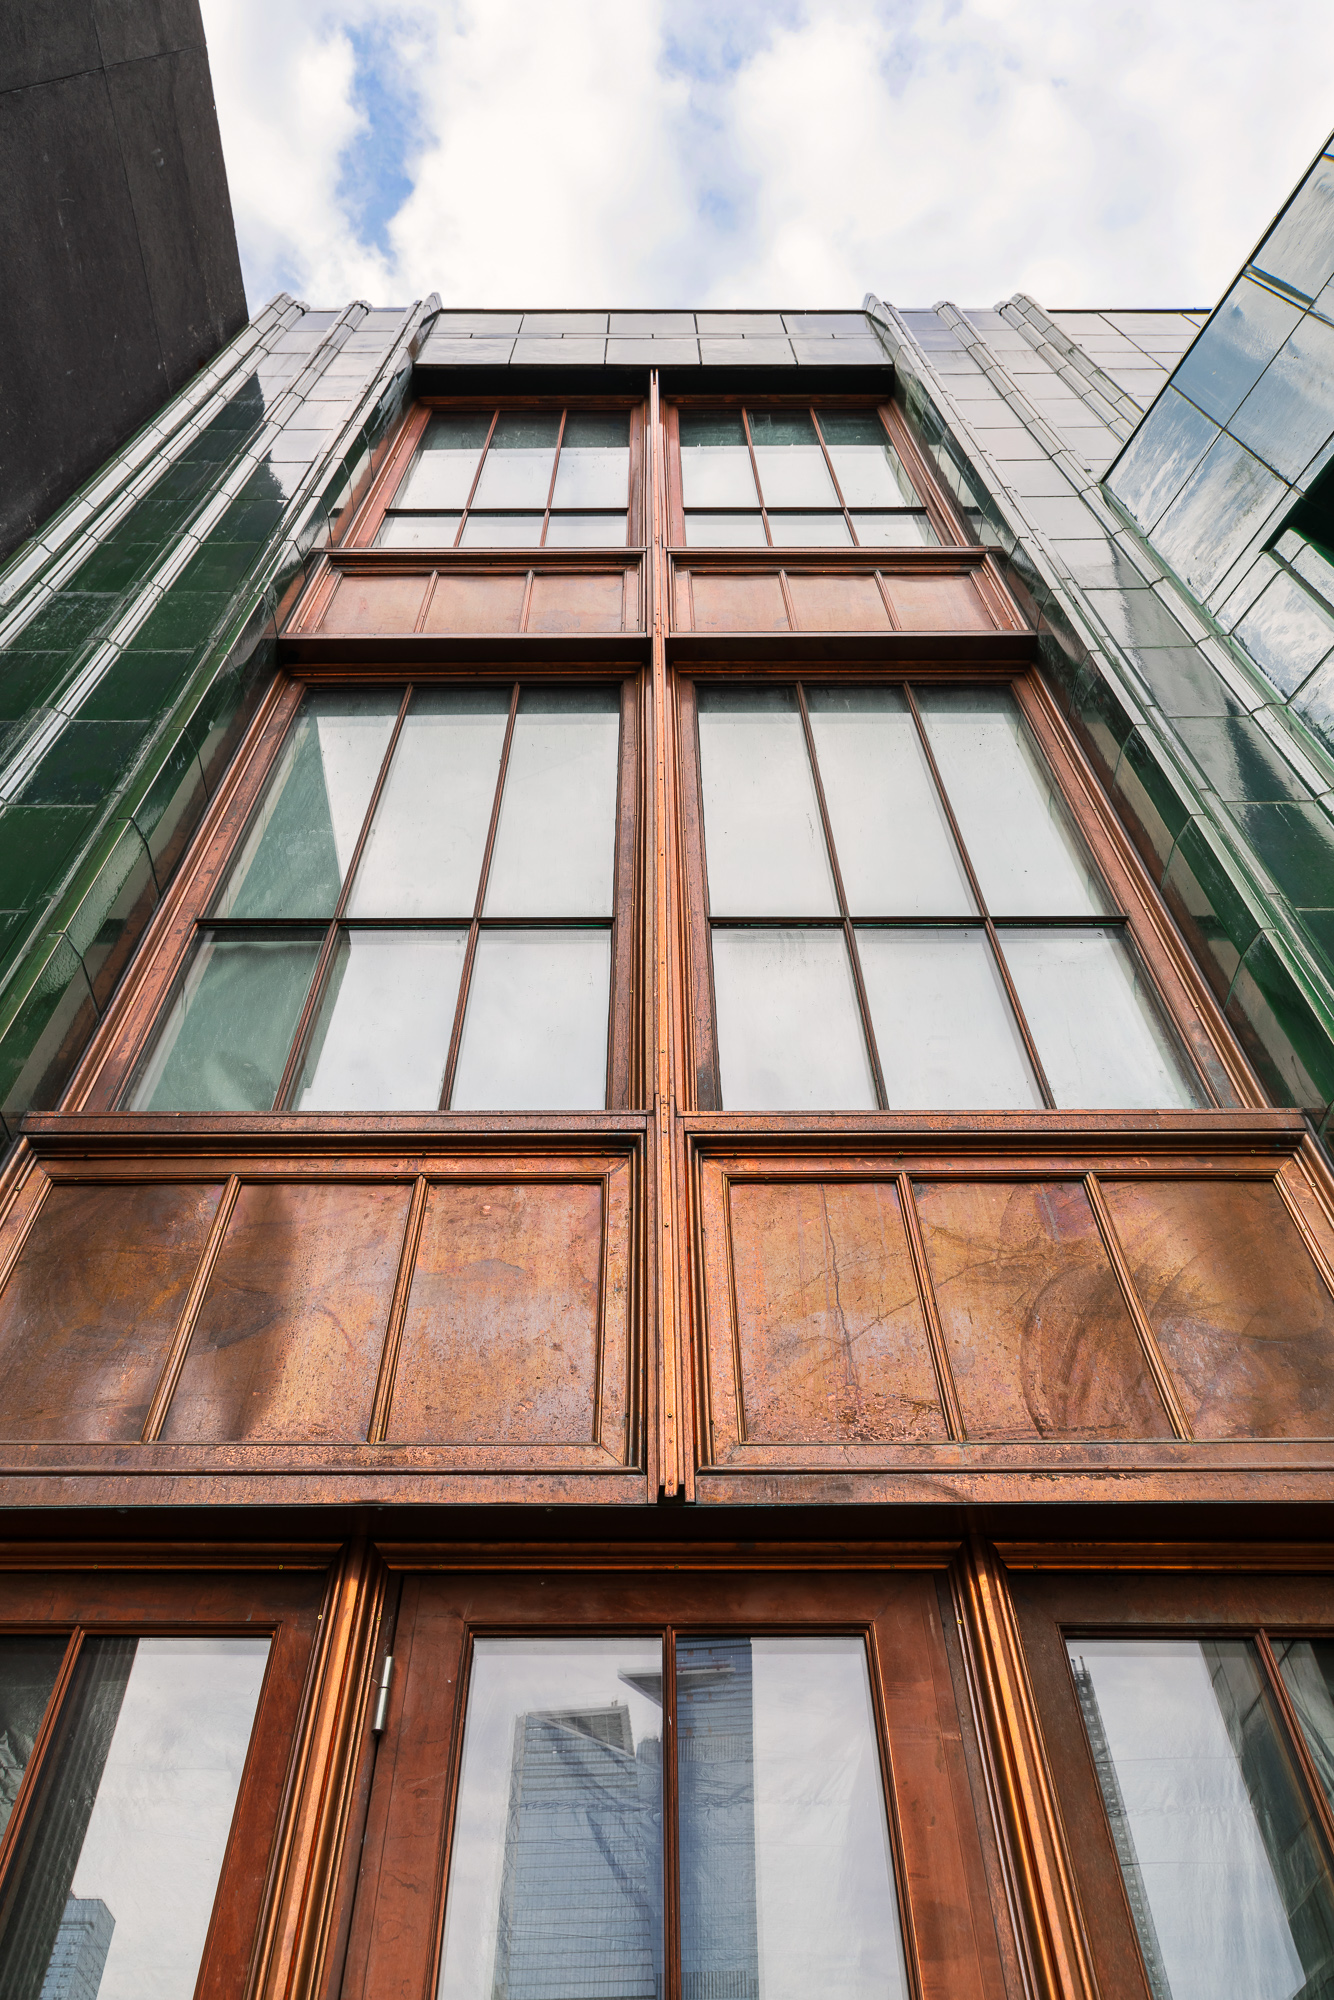 Building with copper metal moulding